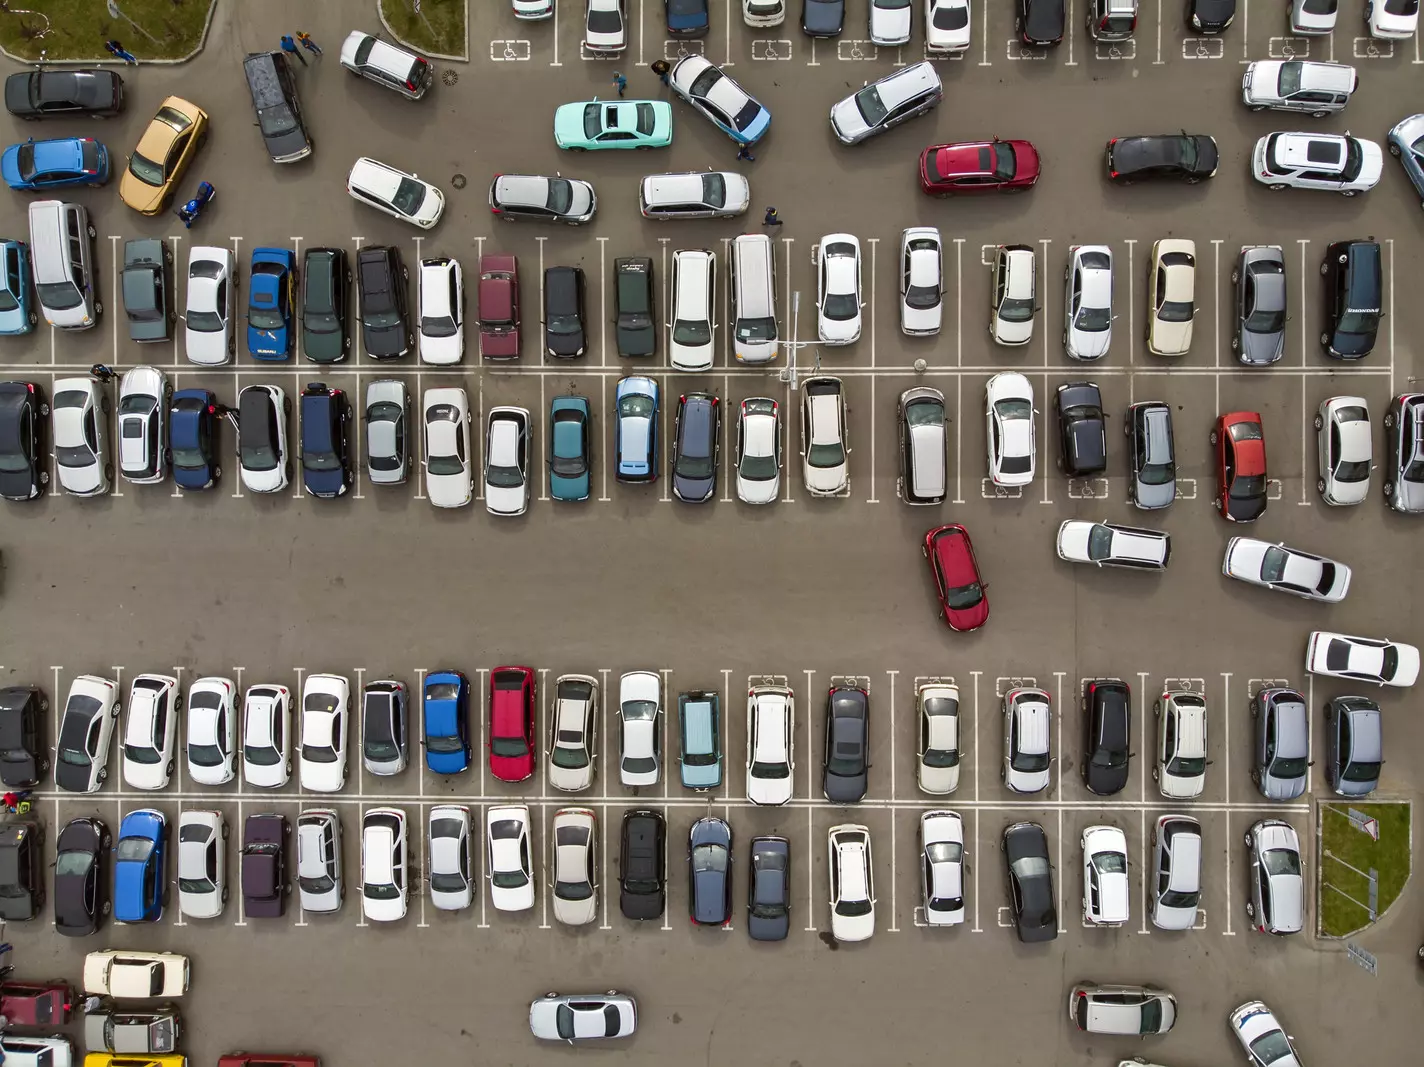 Parking lot laws: Is the 'pull-through' legal?